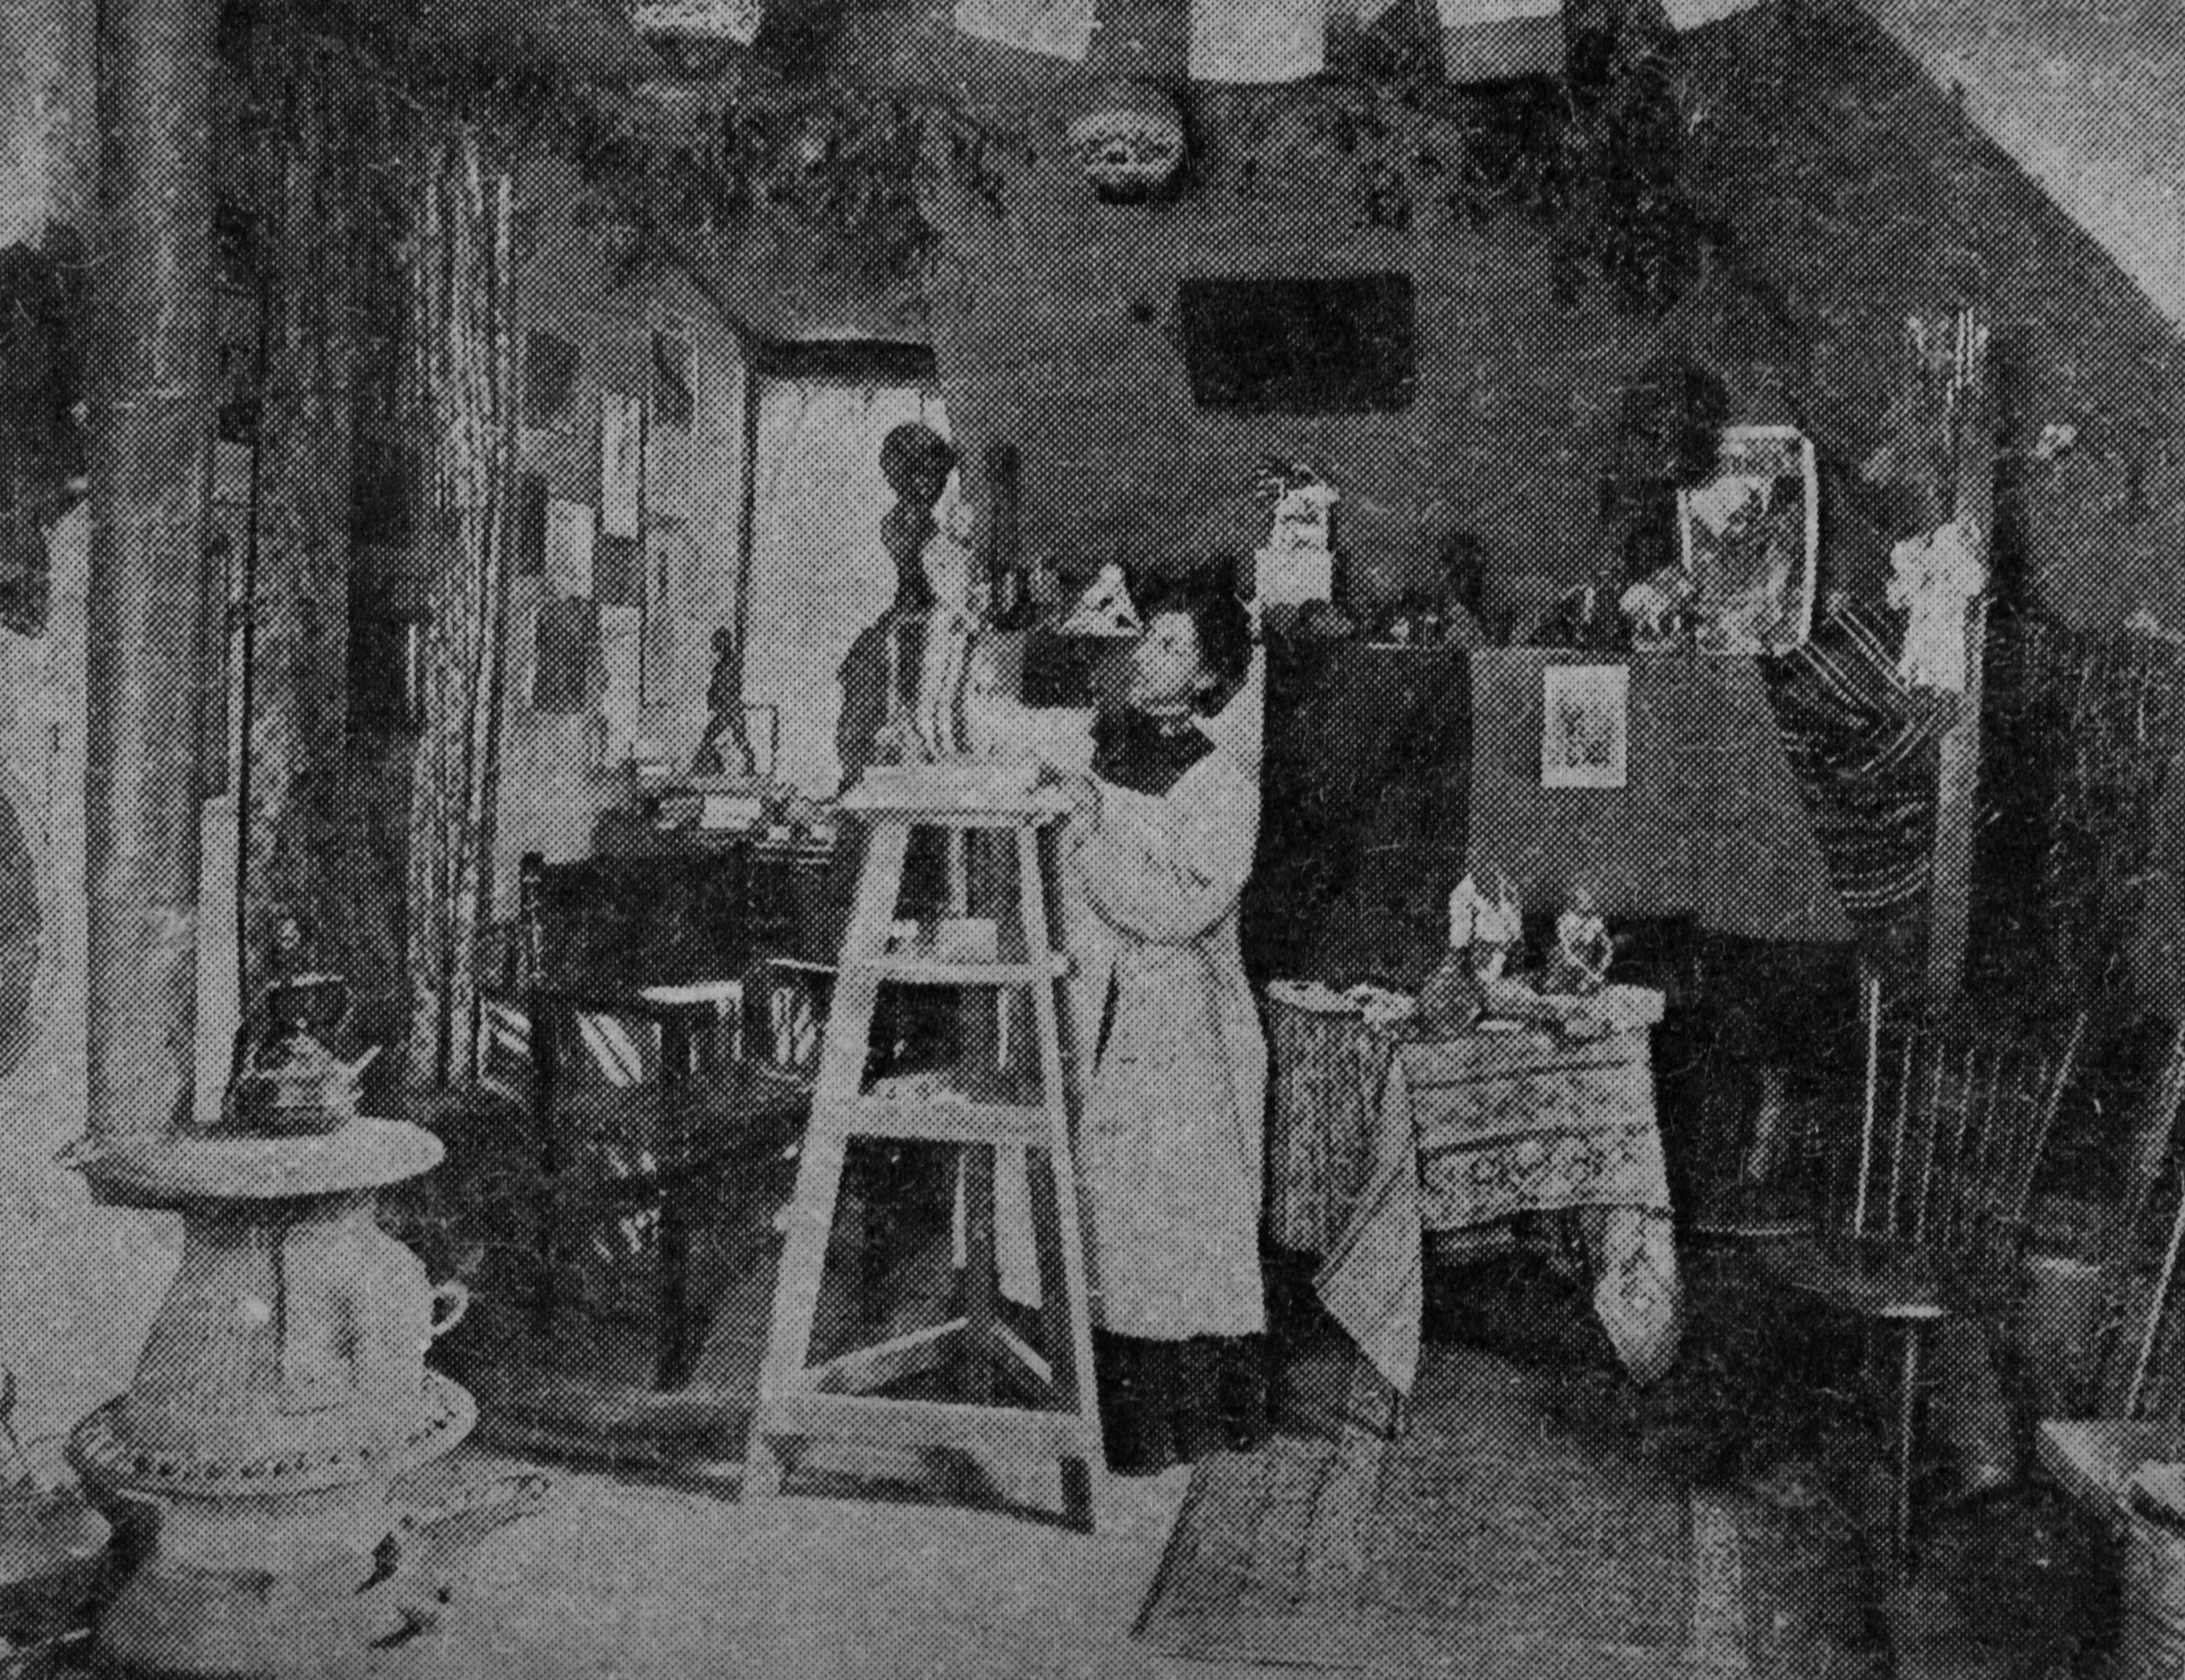 Black-and-white duotone photograph of a sculptor in her studio, working on a small sculpture on a wooden pedestal